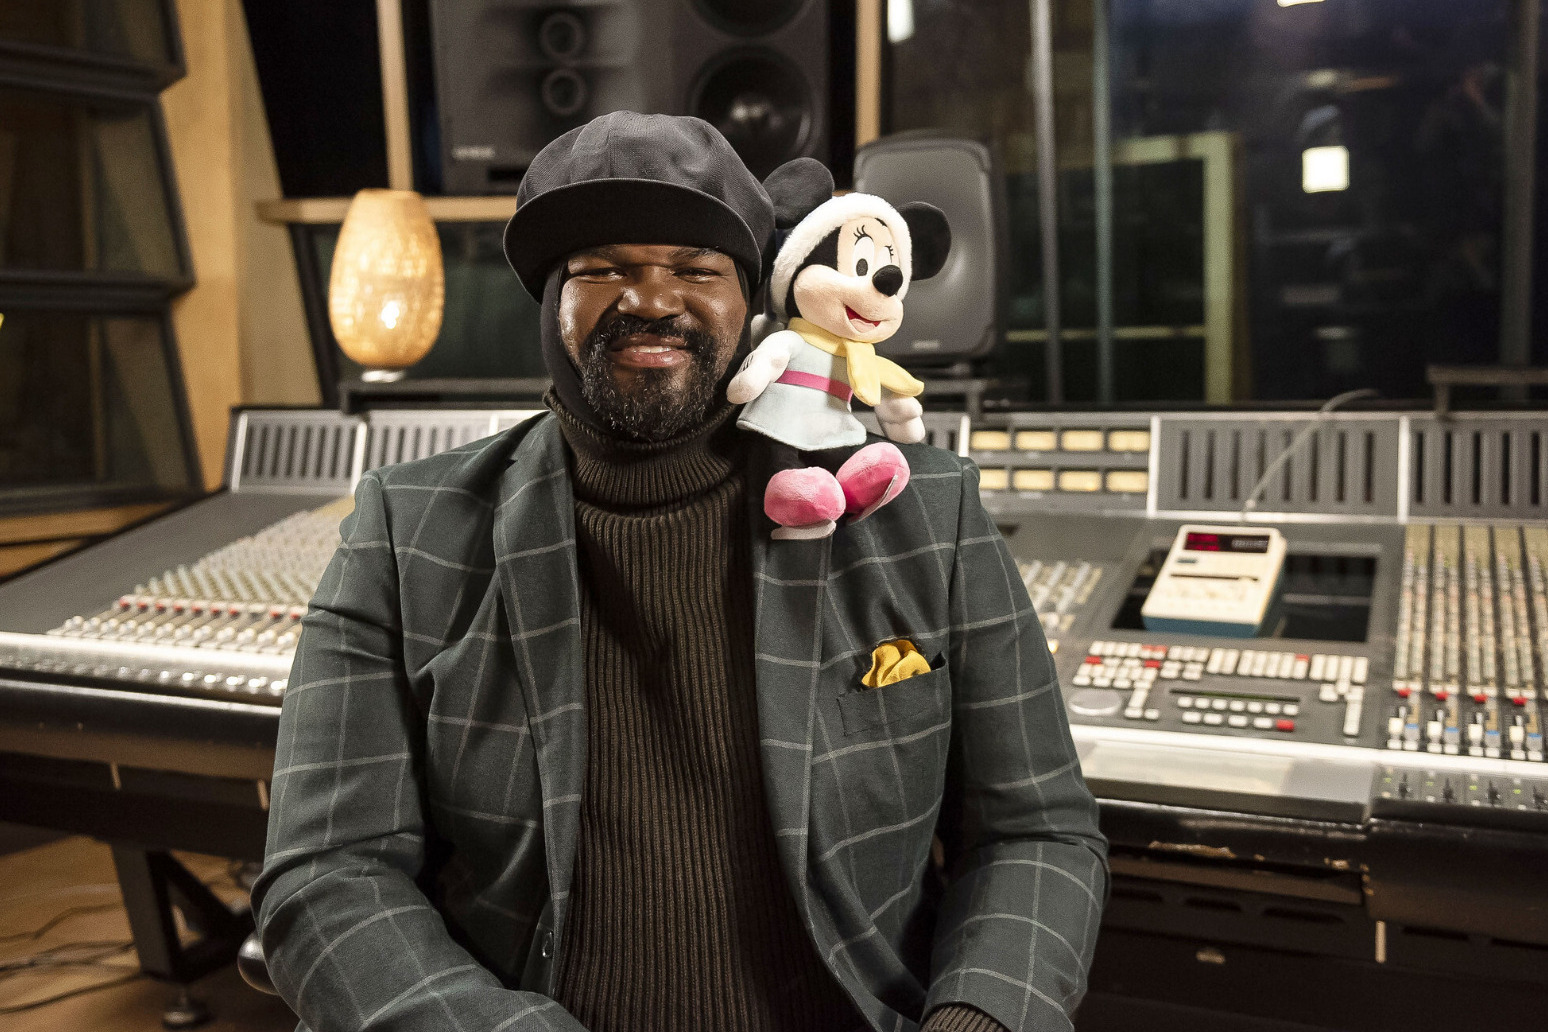 Gregory Porter: Some pre-pandemic music is no longer appropriate 